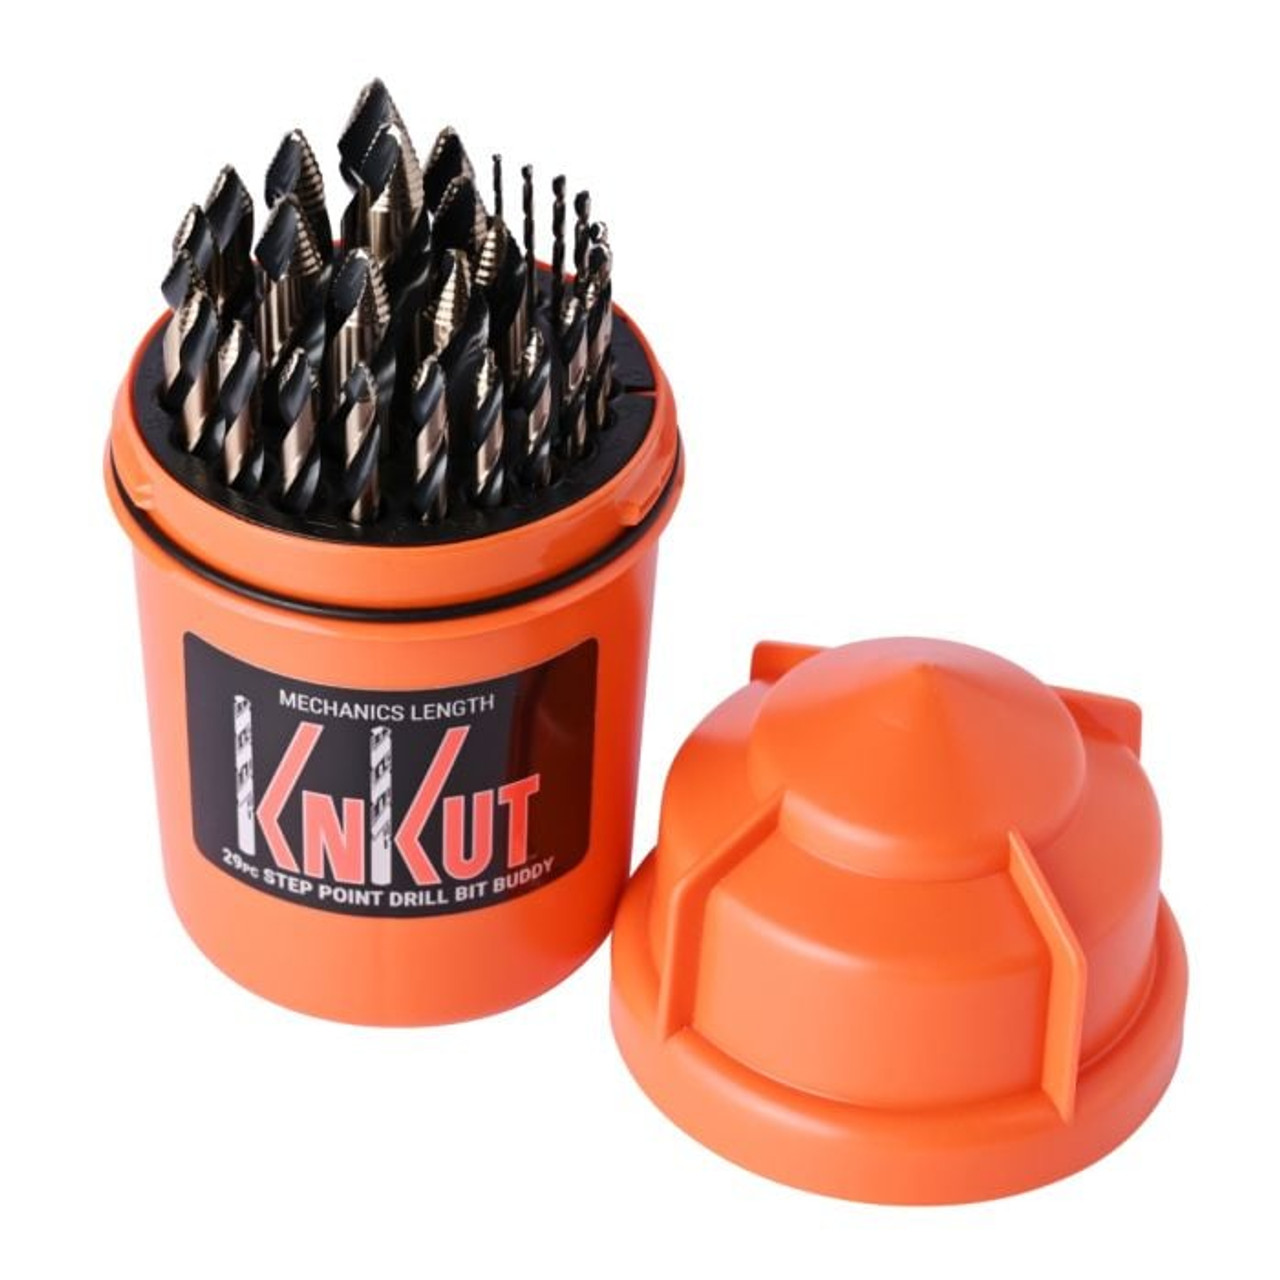 KnKut drill bit set in orange container, mechanics length step point bits